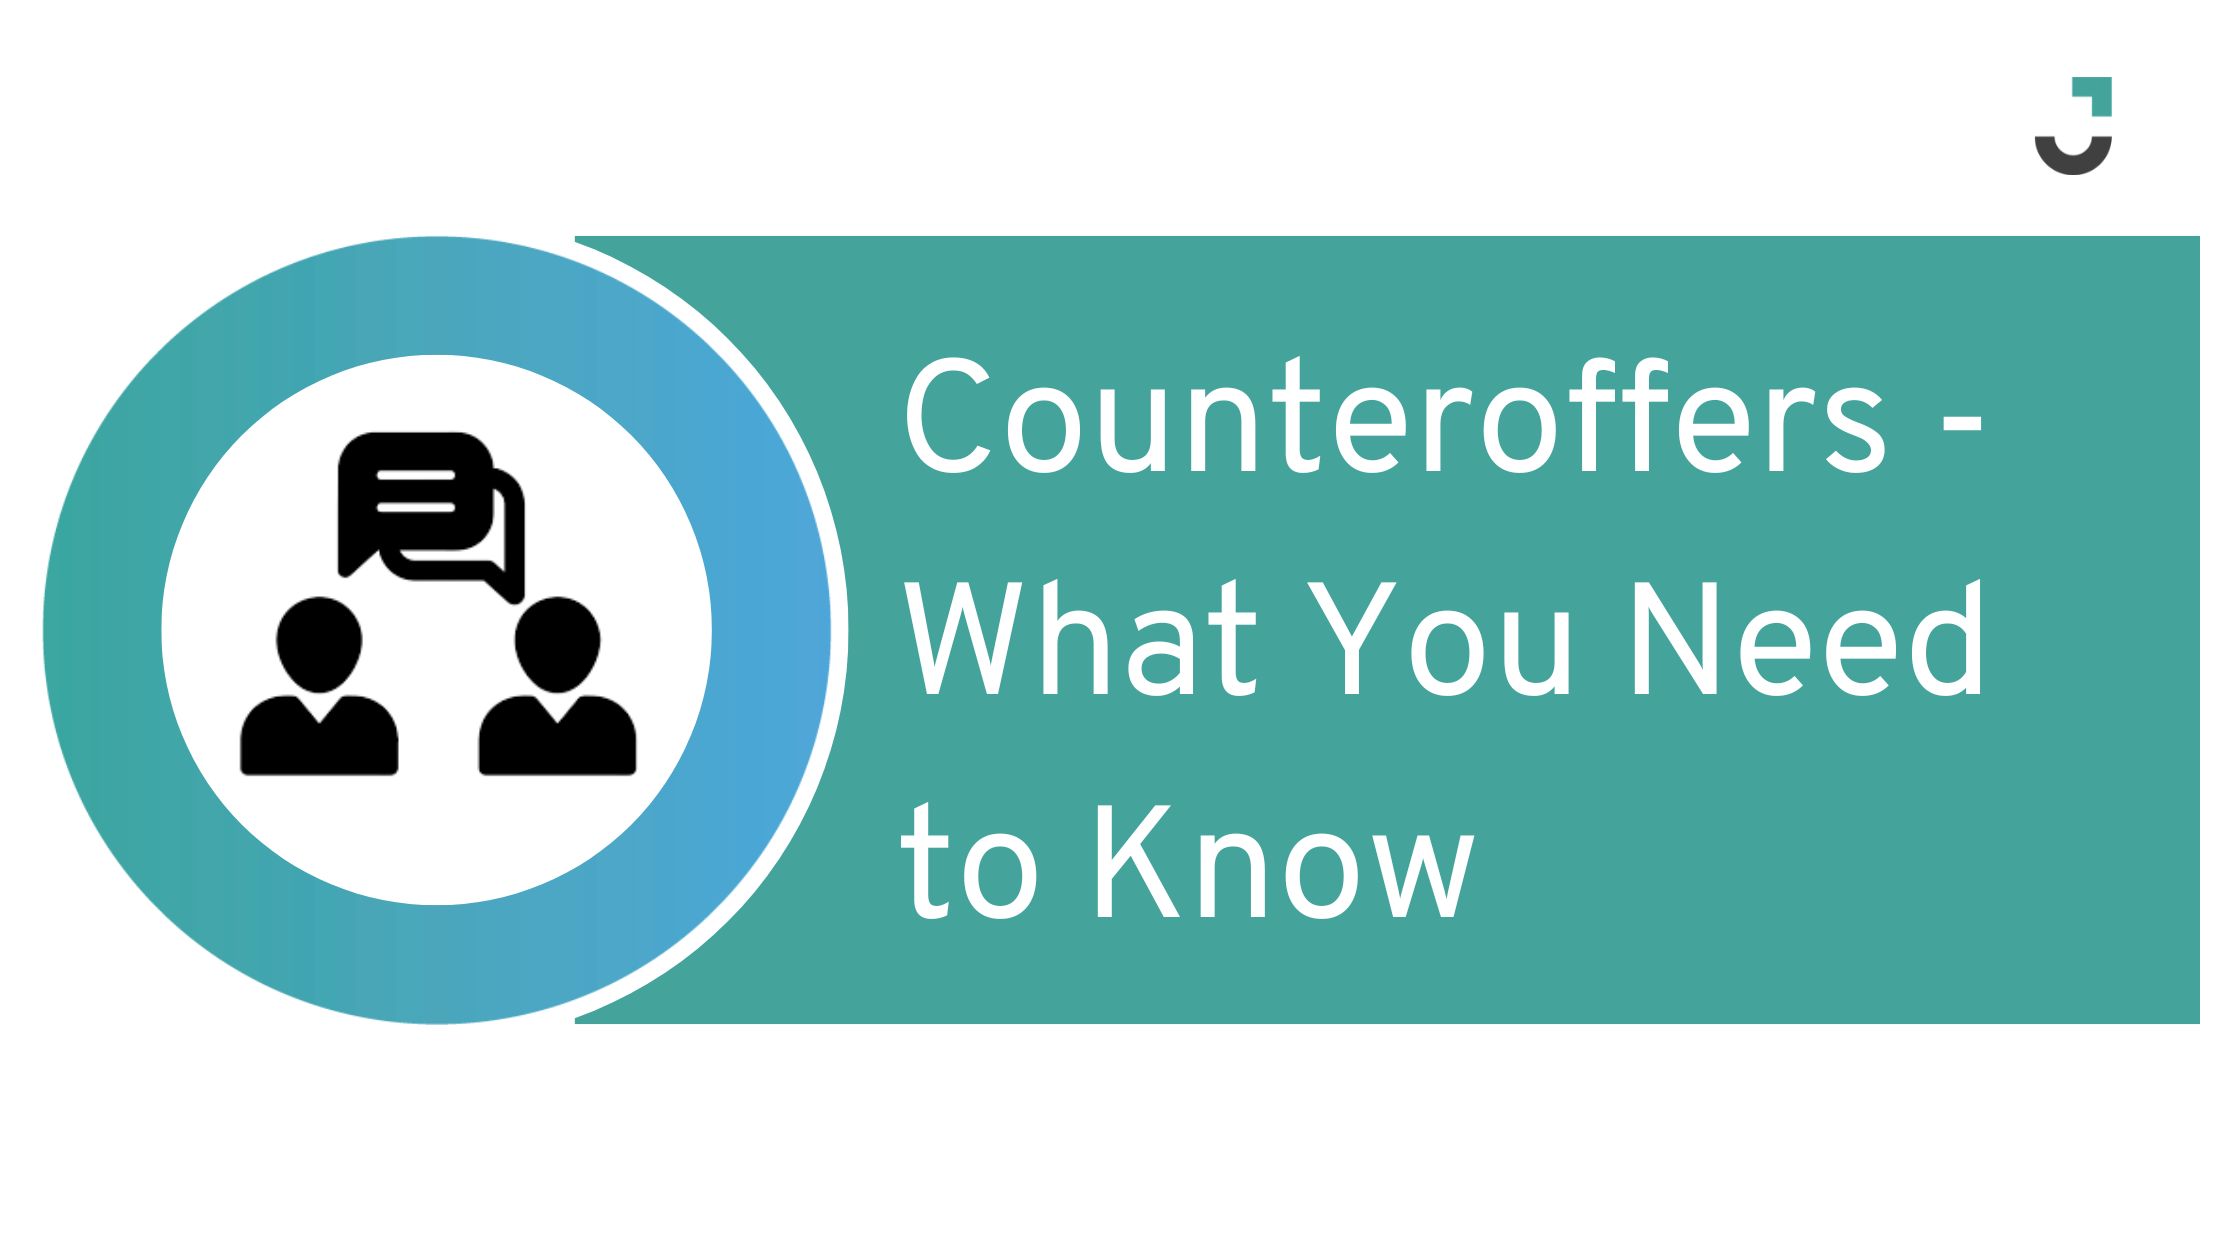 Counteroffers- What You Need to Know